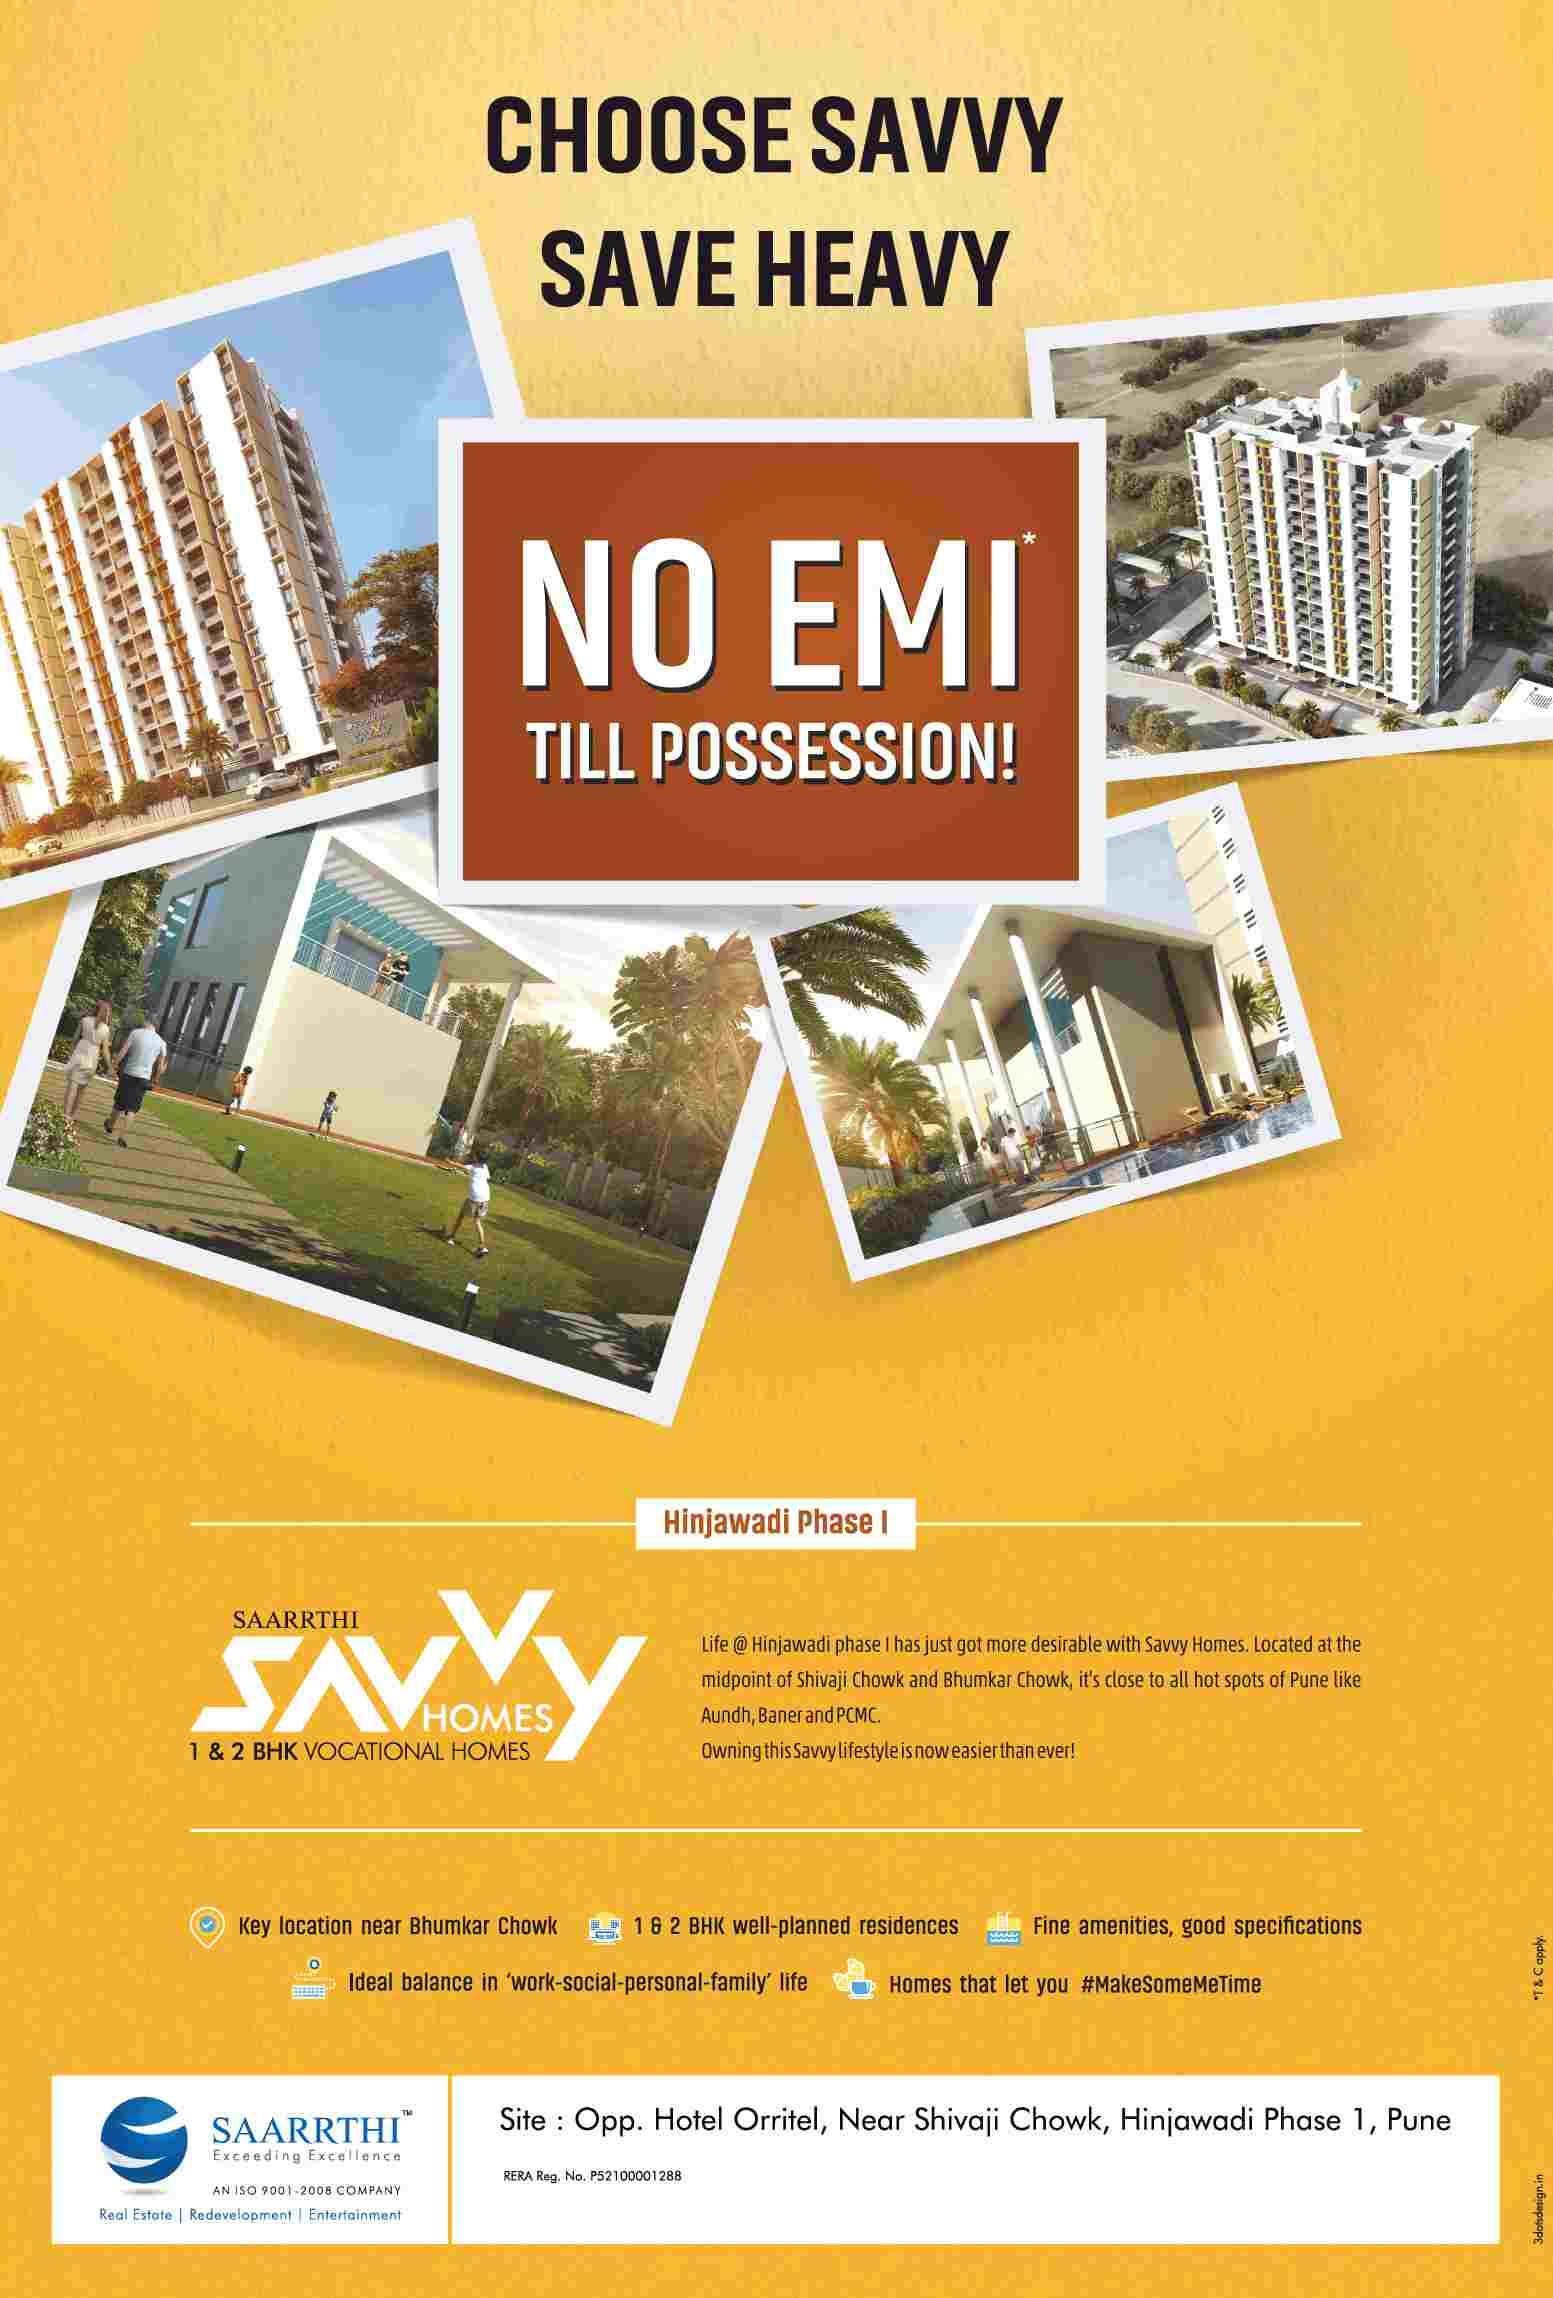 Book vocational homes with no EMI till possession at Saarrthi Savvy Home in Pune